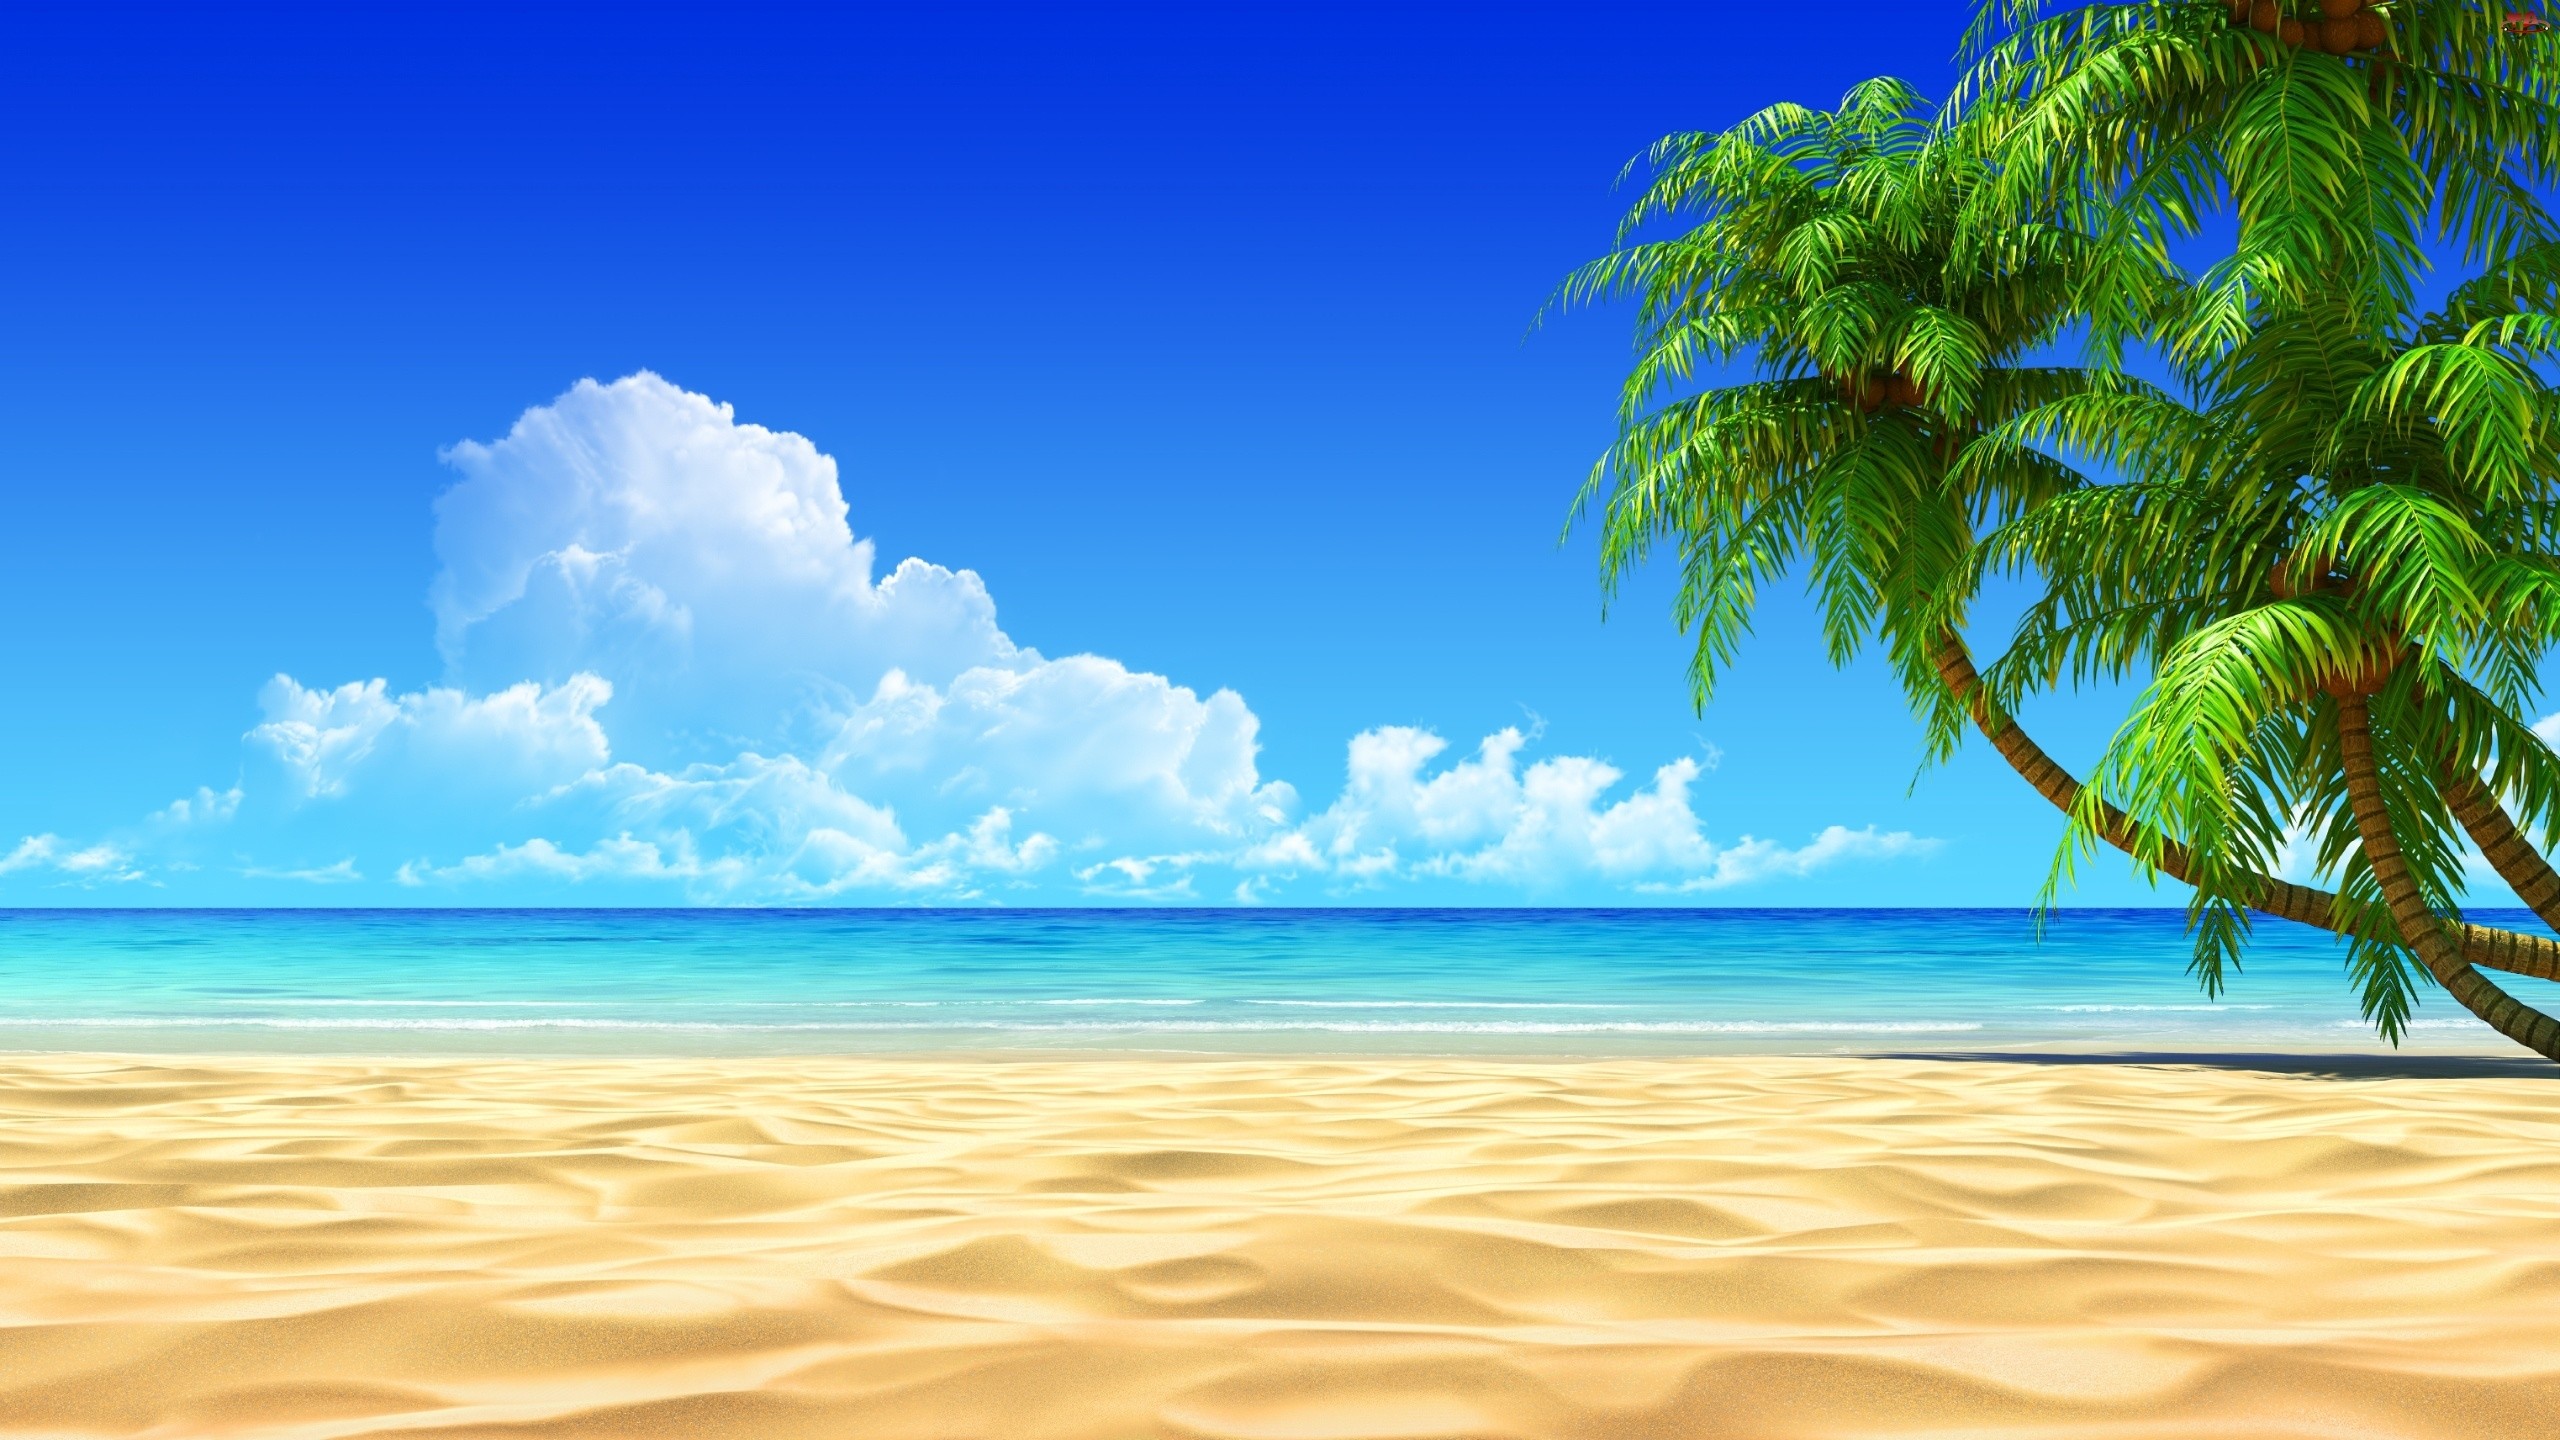 HD Beach Backgrounds (74+ images)